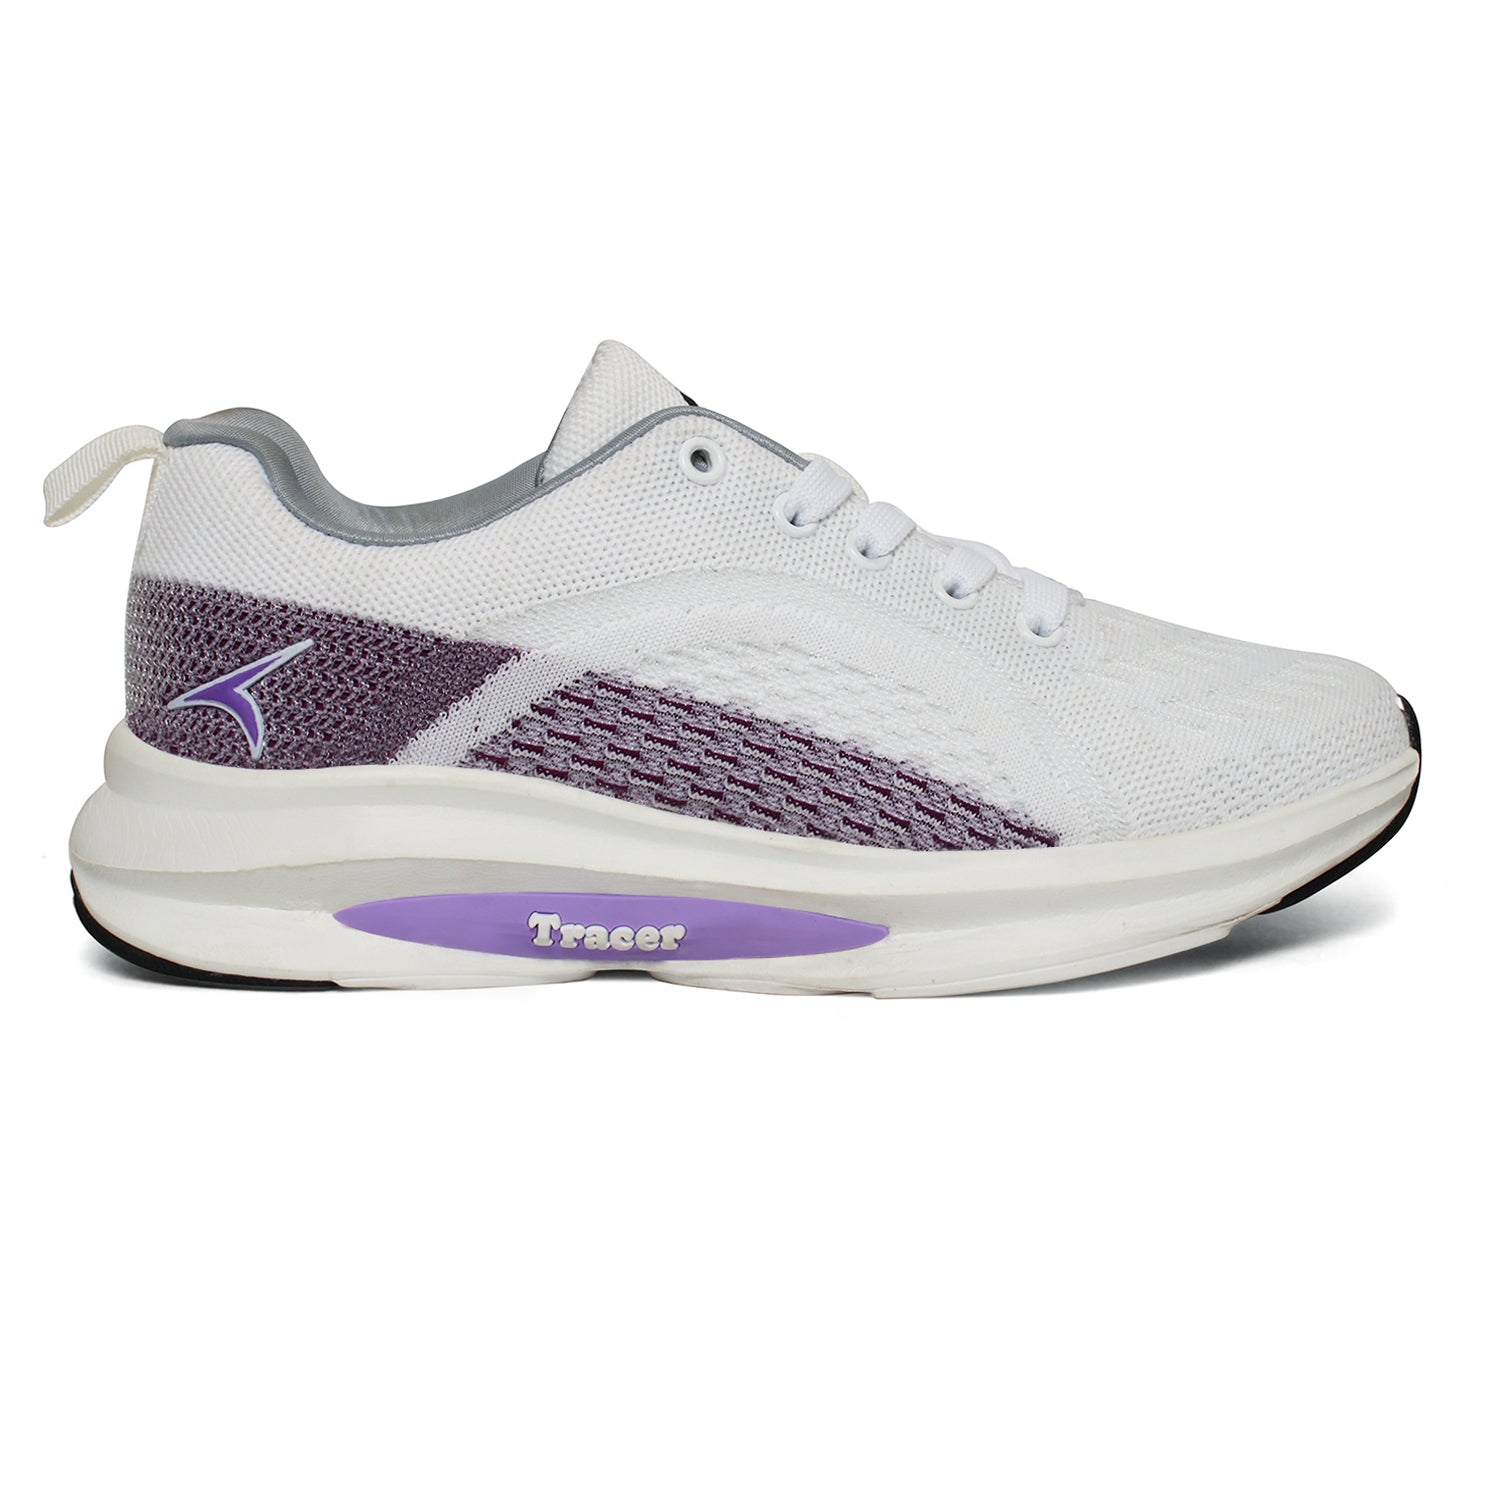 Tracer India Running Shoes for Women's White